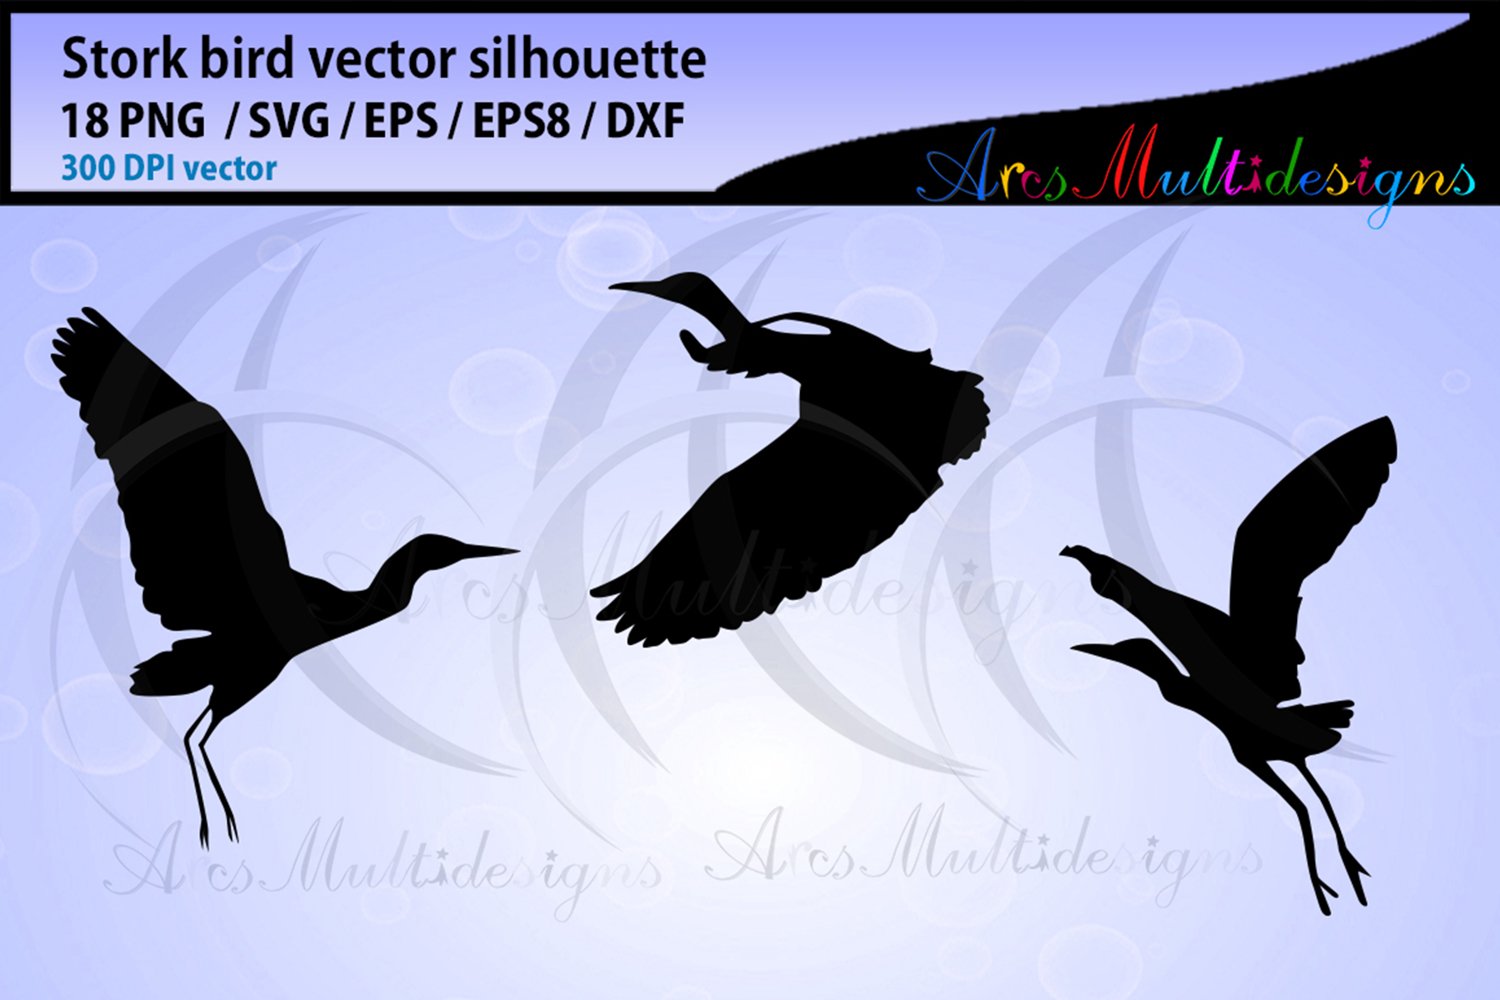 Cover image of Stork bird silhouette svg.